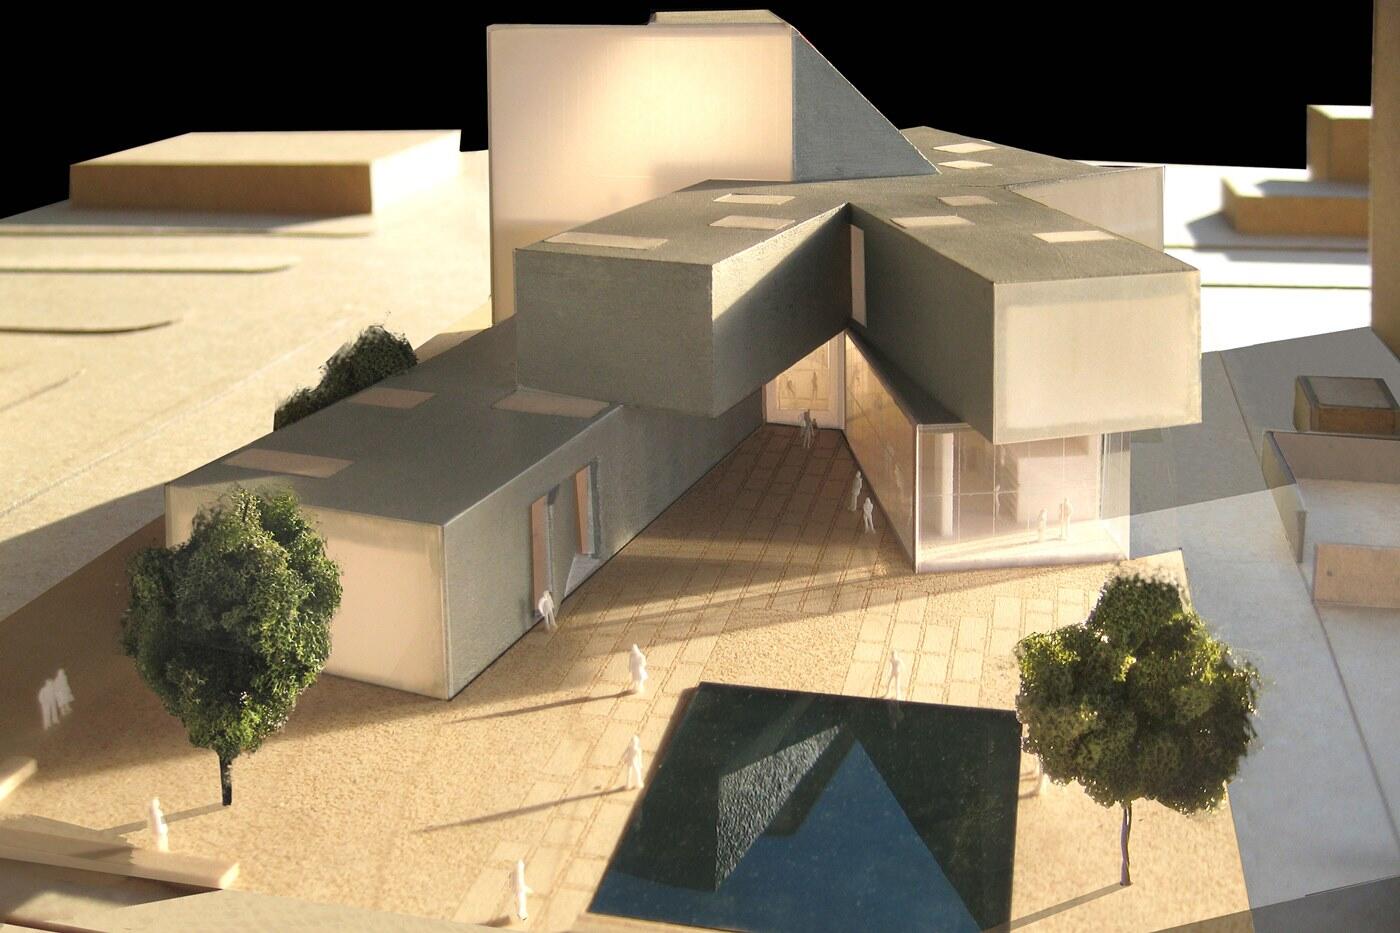 Model of ICA, view looking southeast. Image courtesy of Steven Holl Architects. 